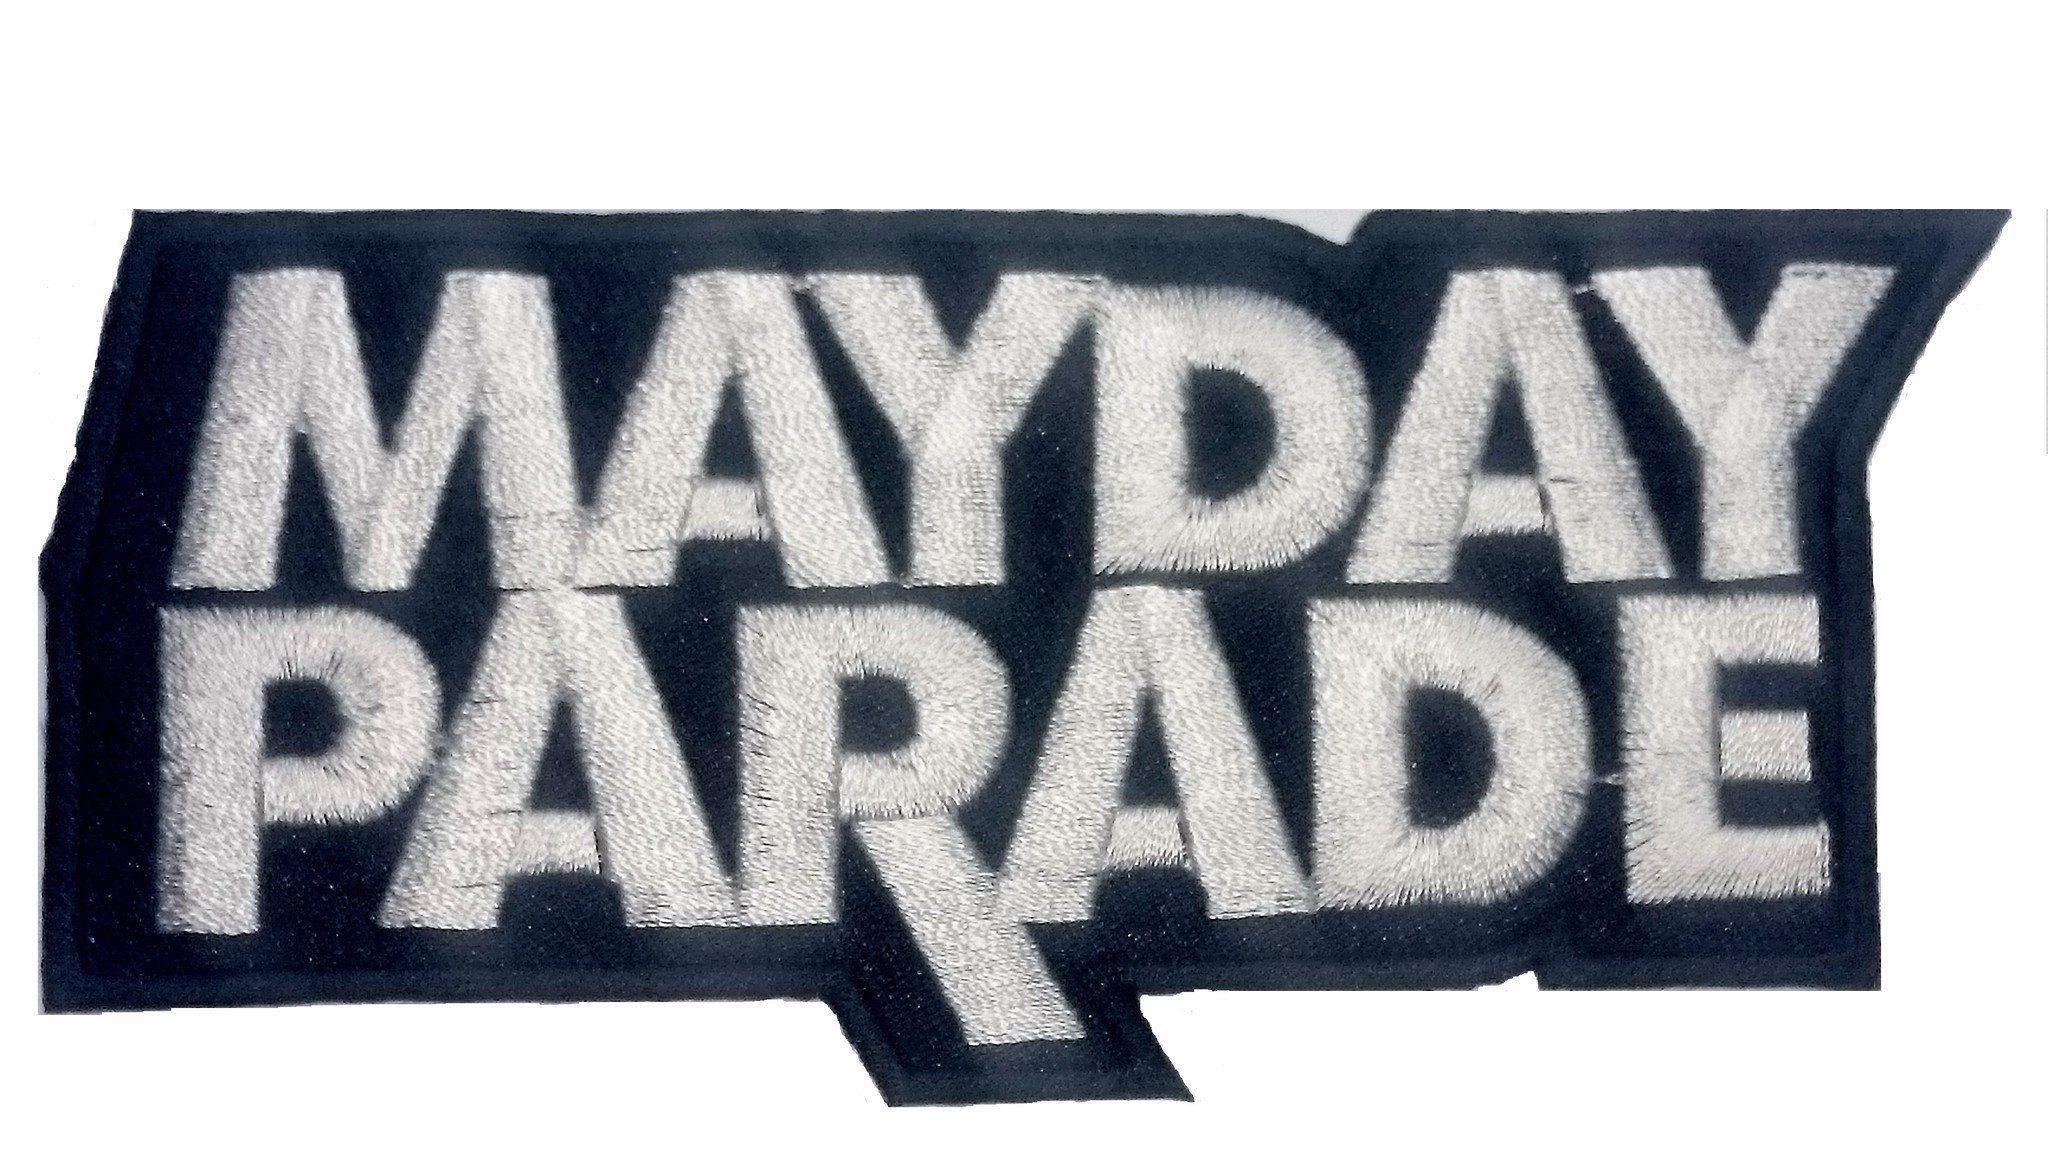 Mayday Parade Logo - MAYDAY PARADE Logo Iron On Sew On Embroidered Shirt Jeans Hat Patch